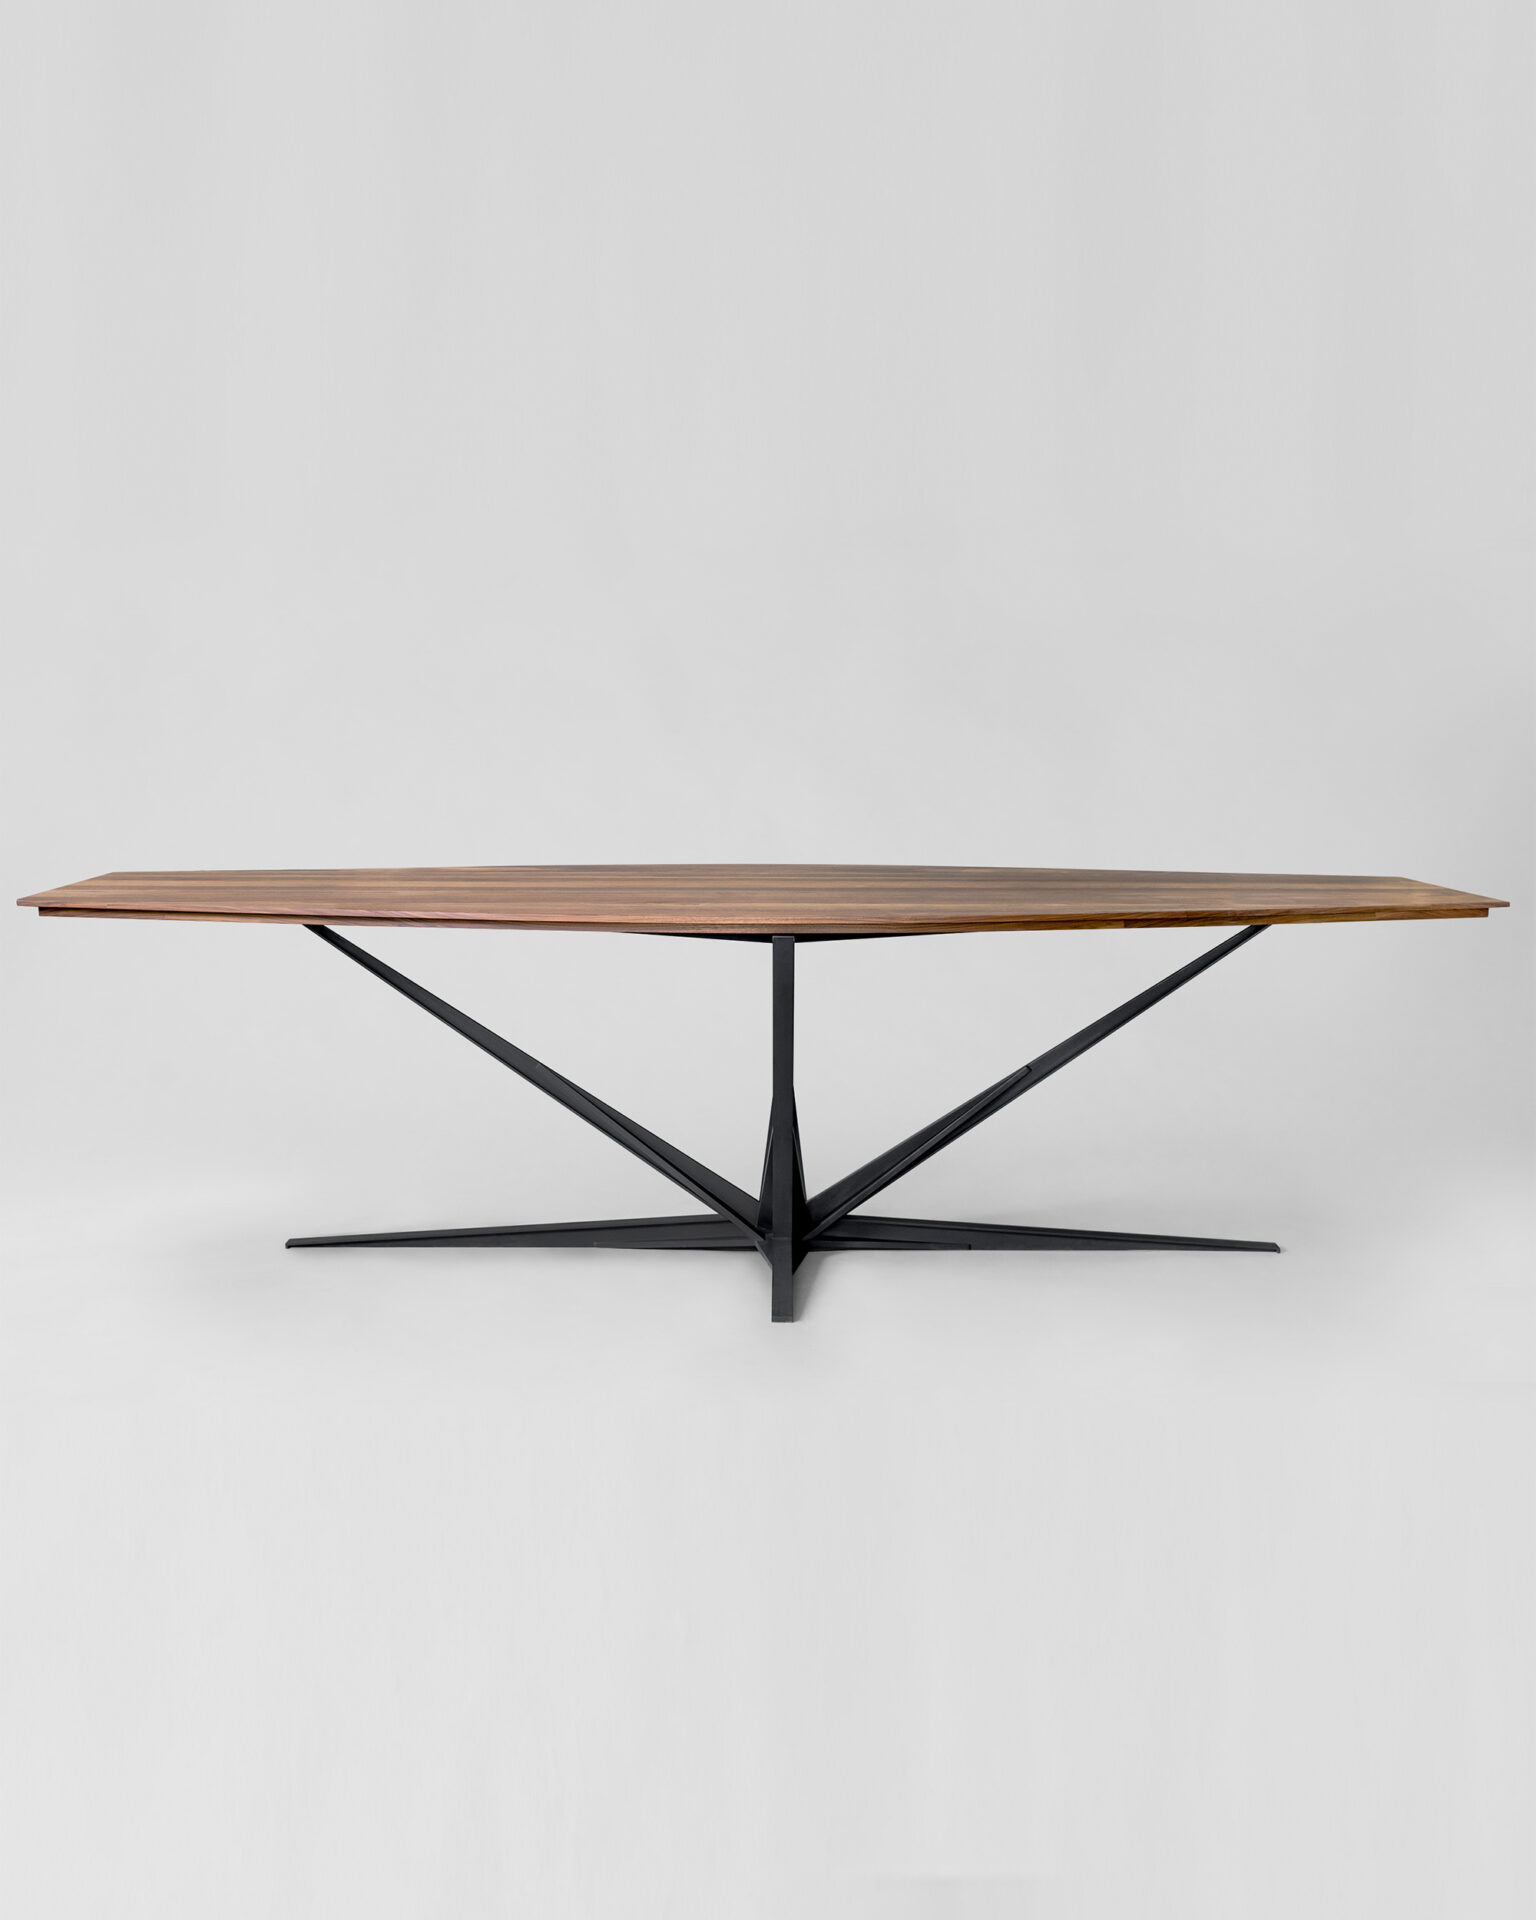 Atra_Agave Dining Table_Case Goods_Studio Fenice_ (2)